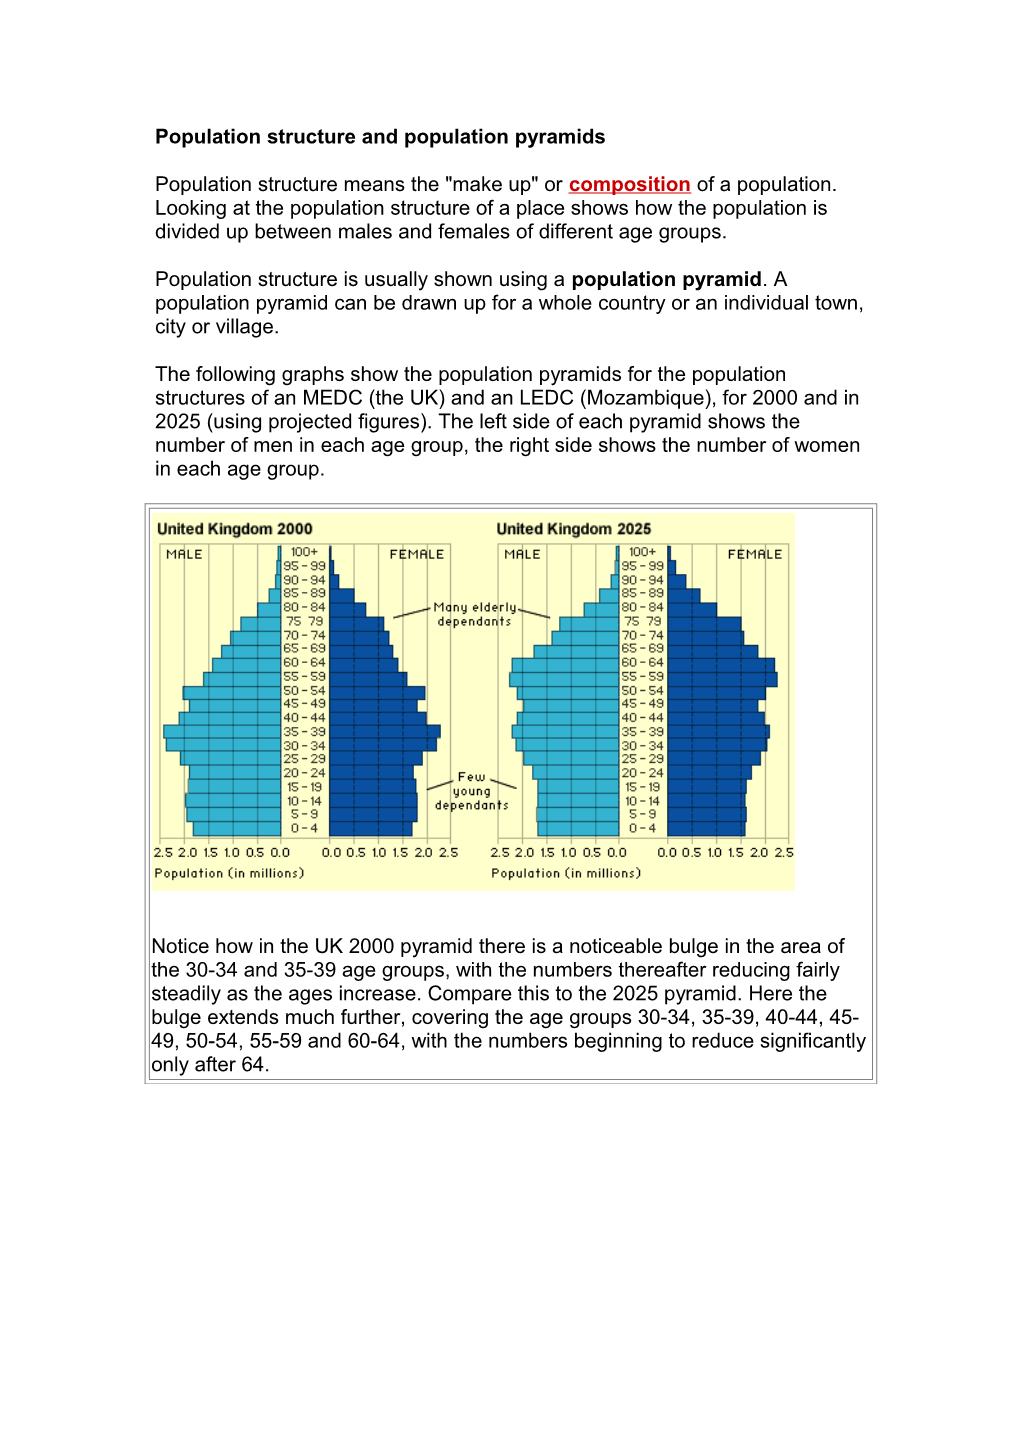 Population Structure and Population Pyramids